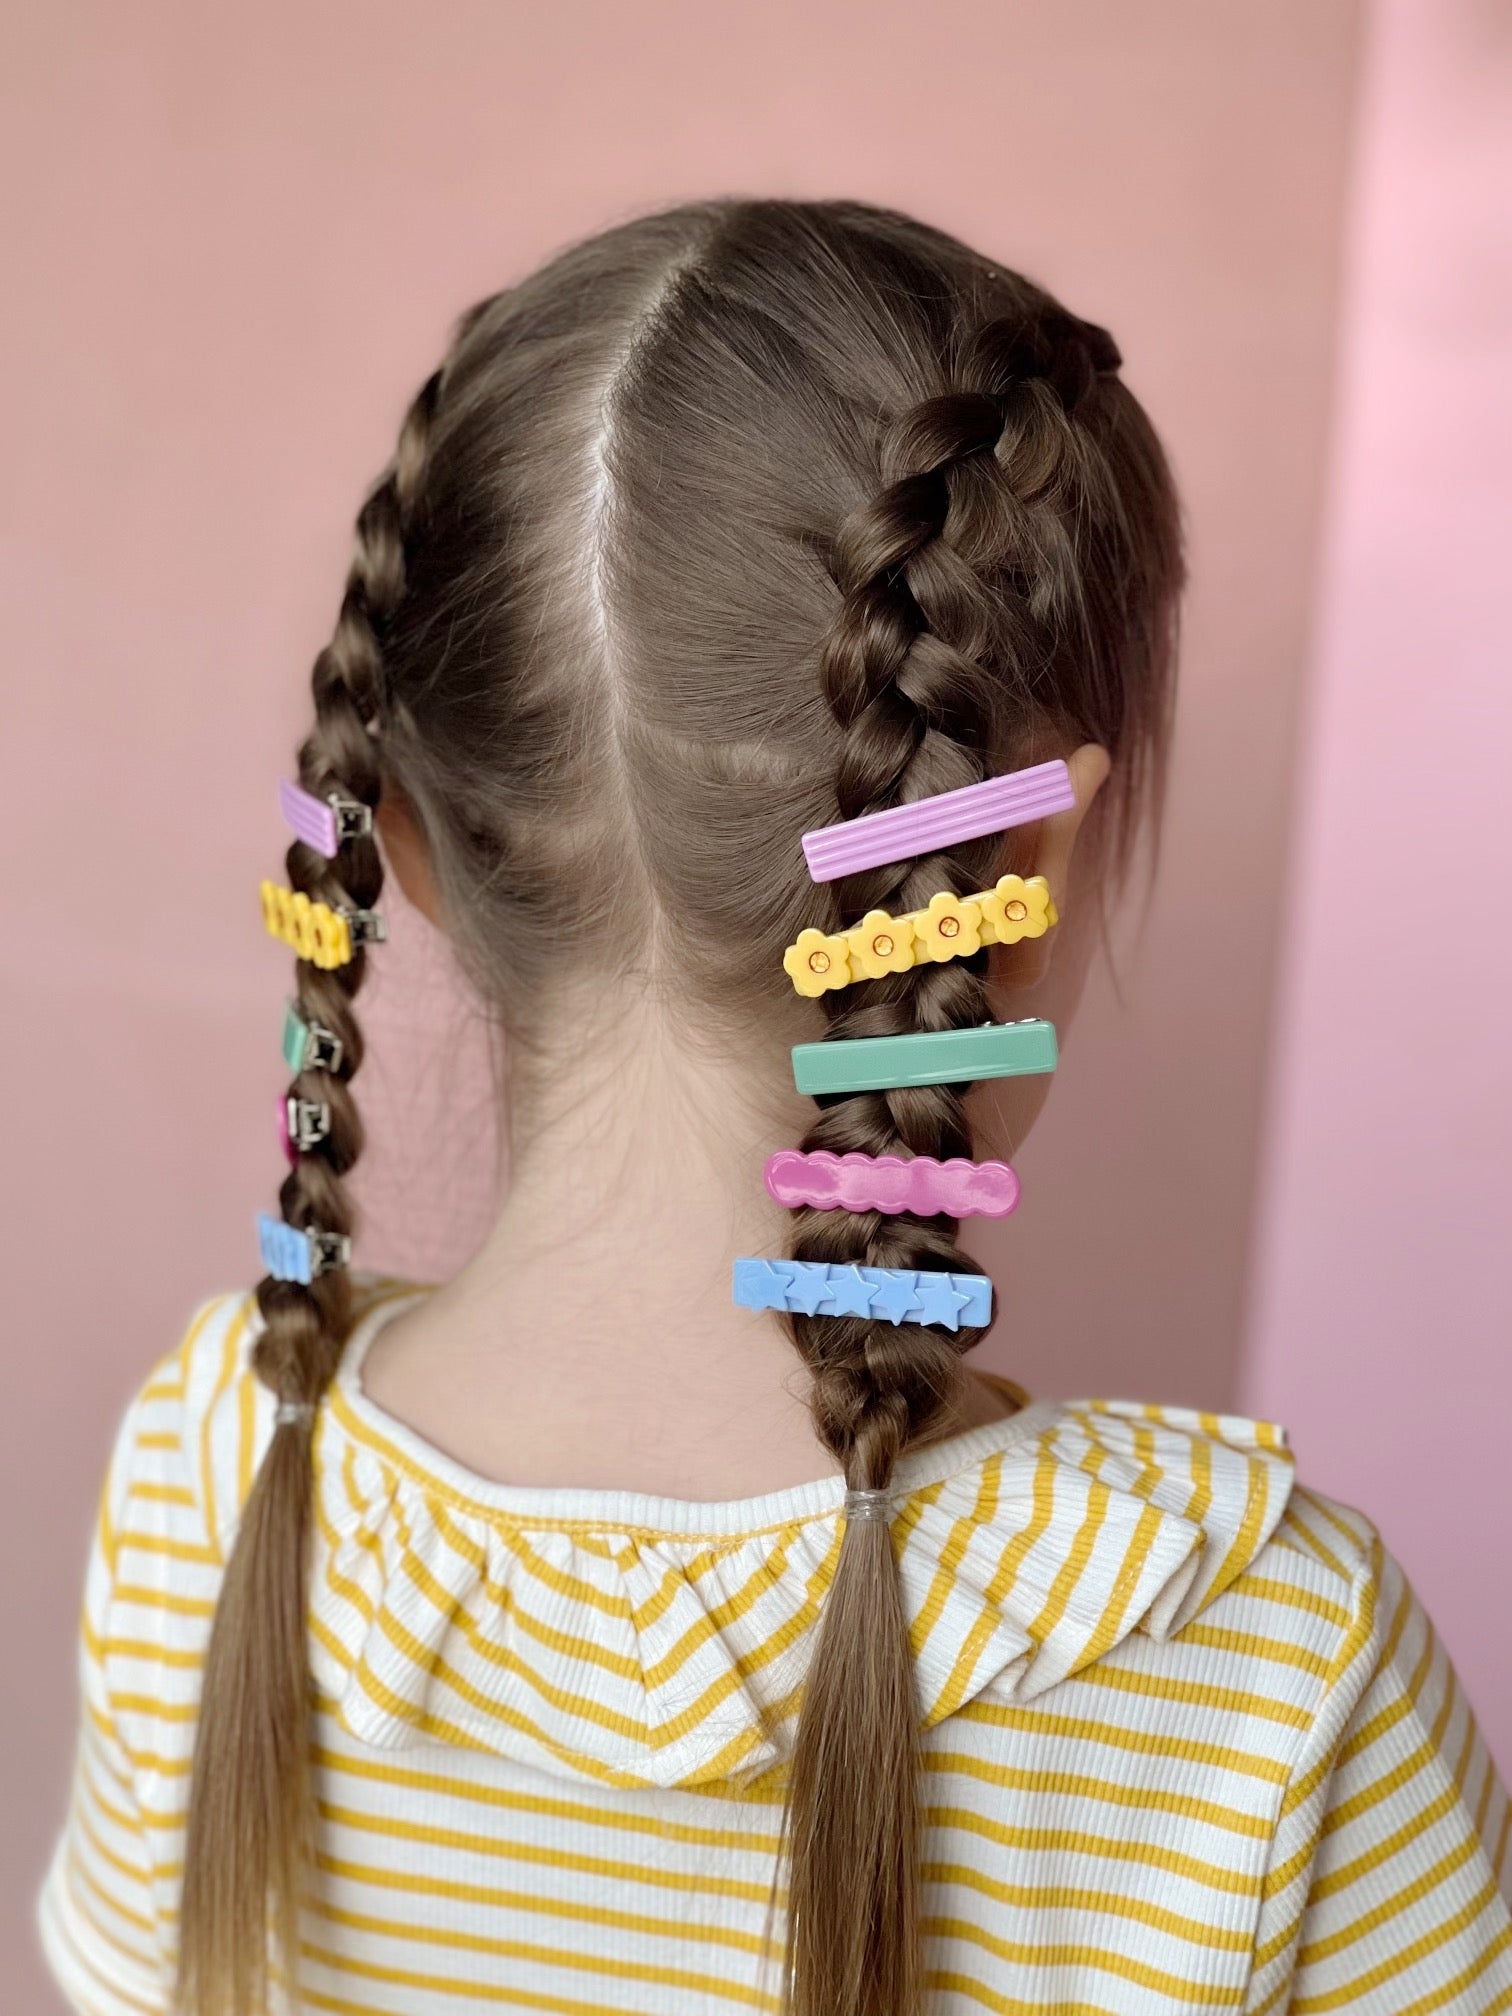 25 Winter Party Hairstyles + Accessories For 2022-23 - Brit + Co